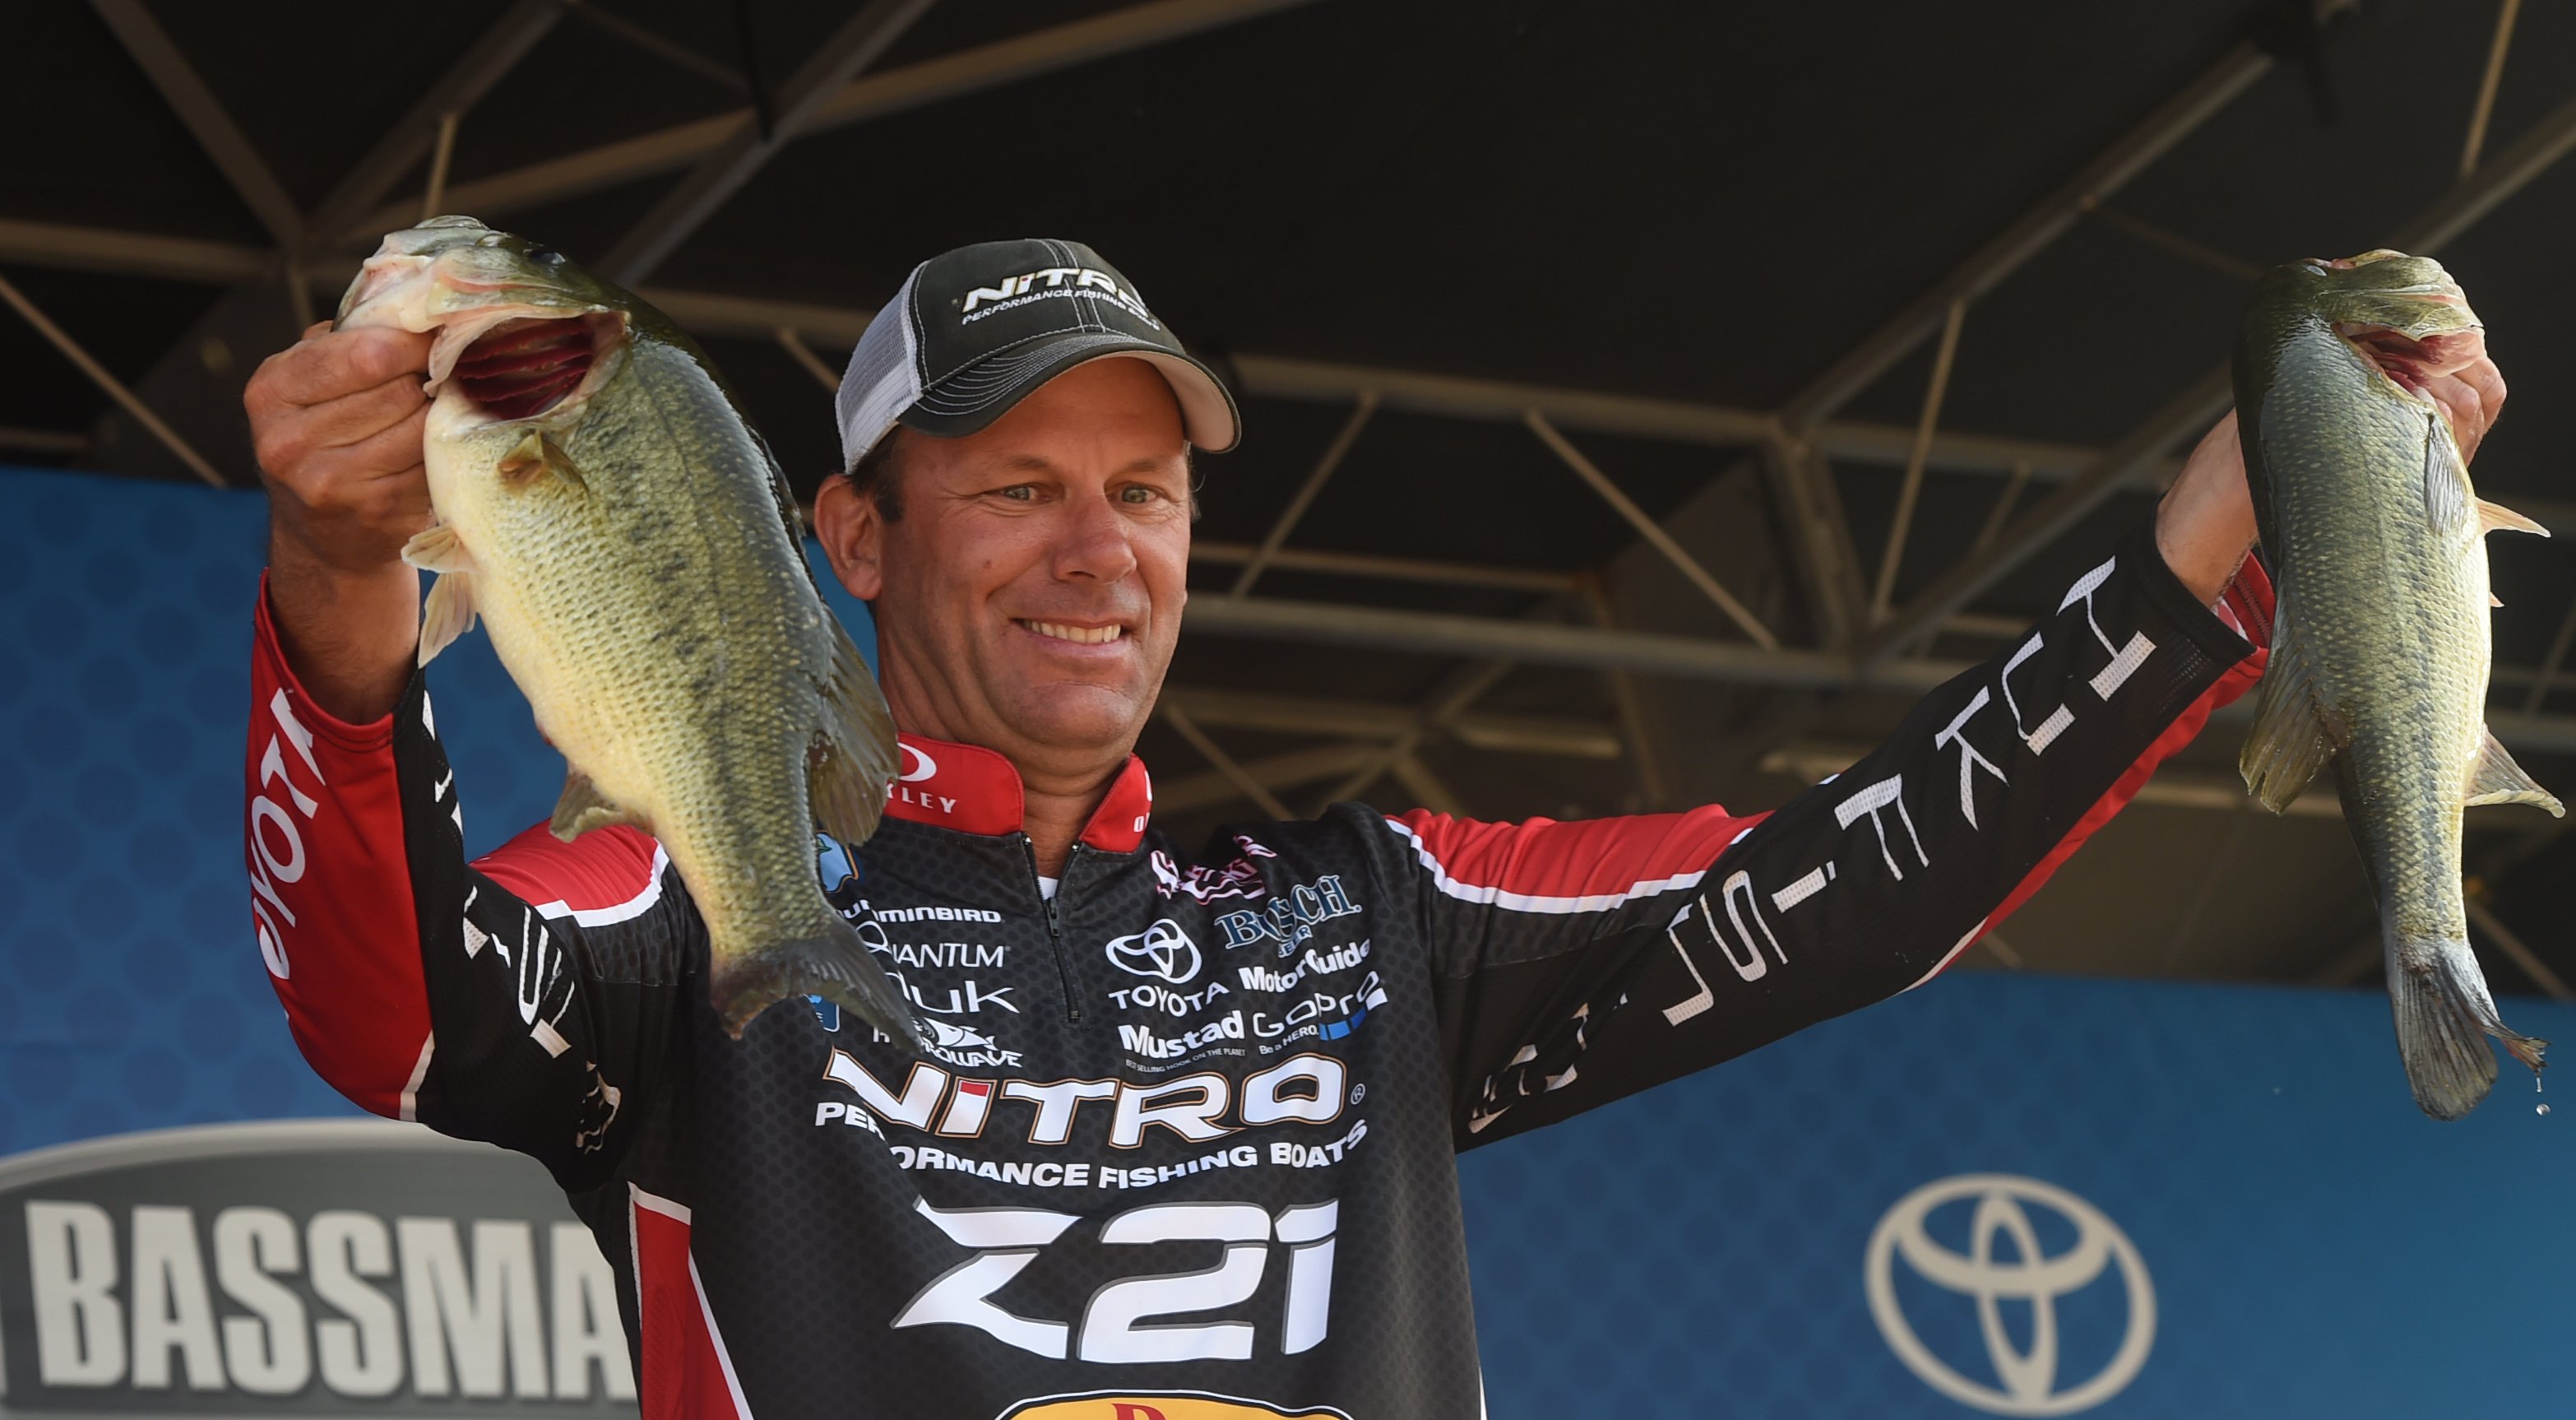 Bass fishing's biggest star brings farewell tour to Bay City for